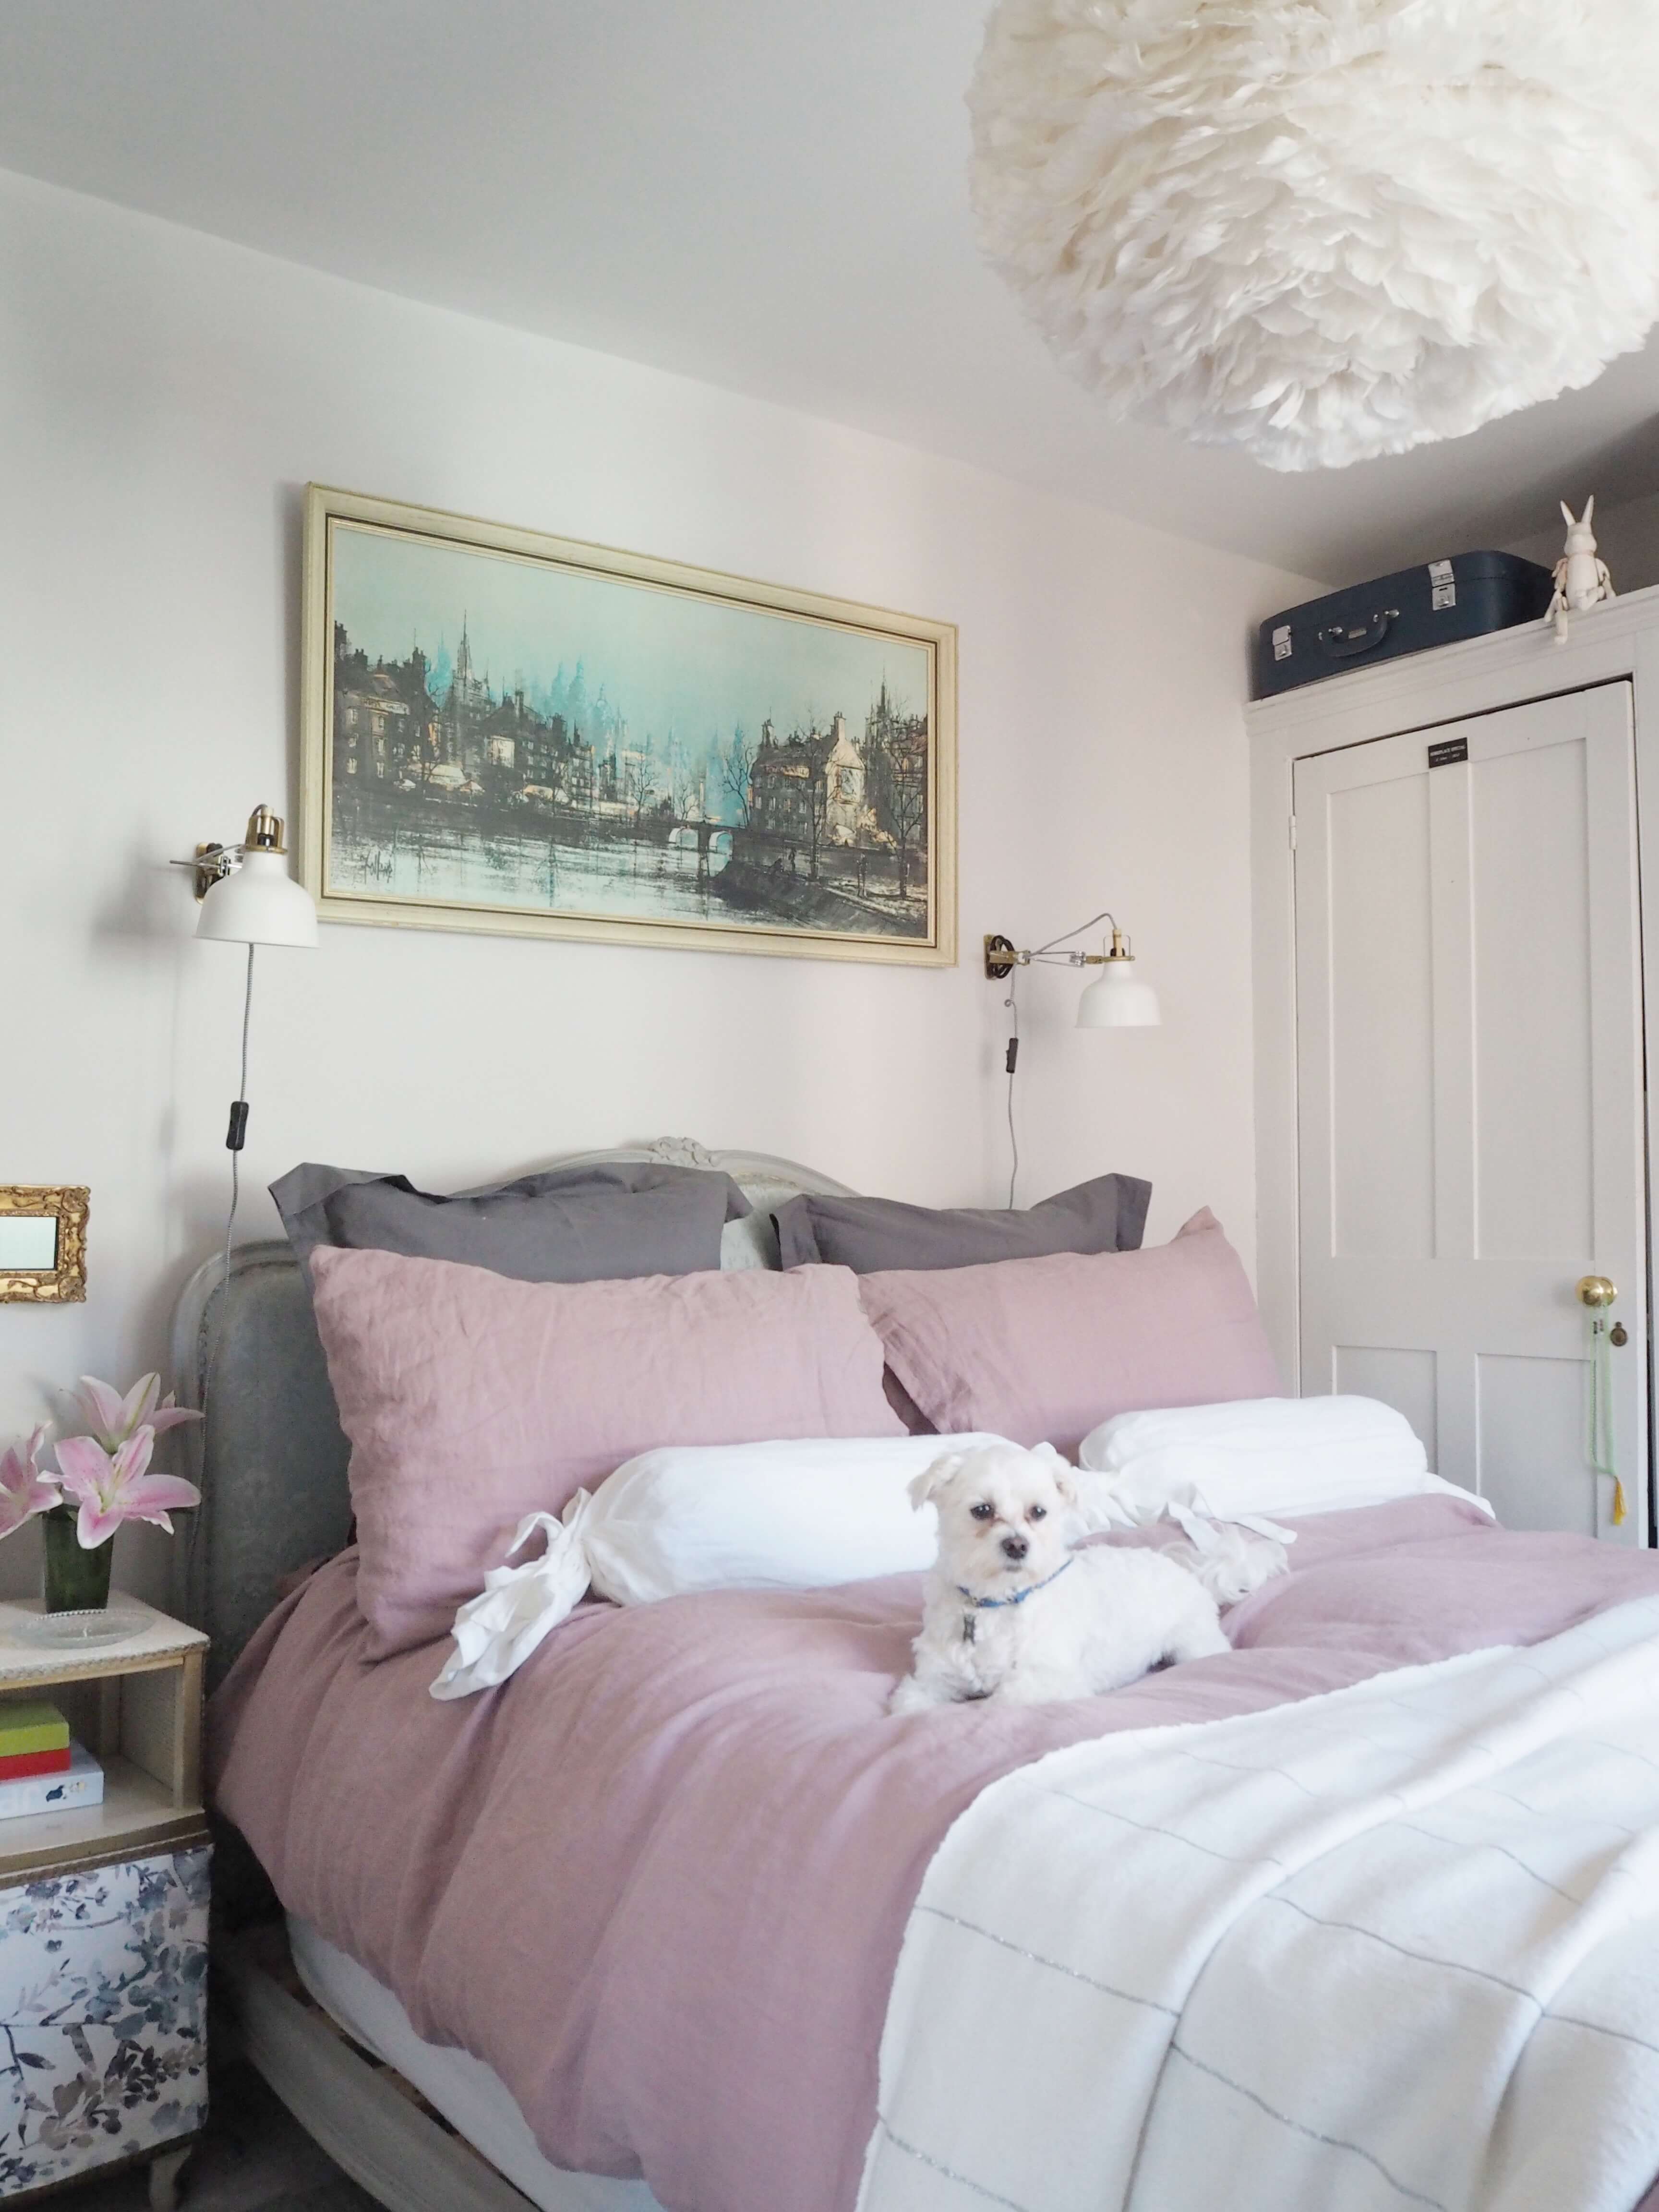 In this post, I'm sharing my tips and advice on why you need linen bedding in your bedroom by interior stylist and lifestyle blogger Maxine Brady